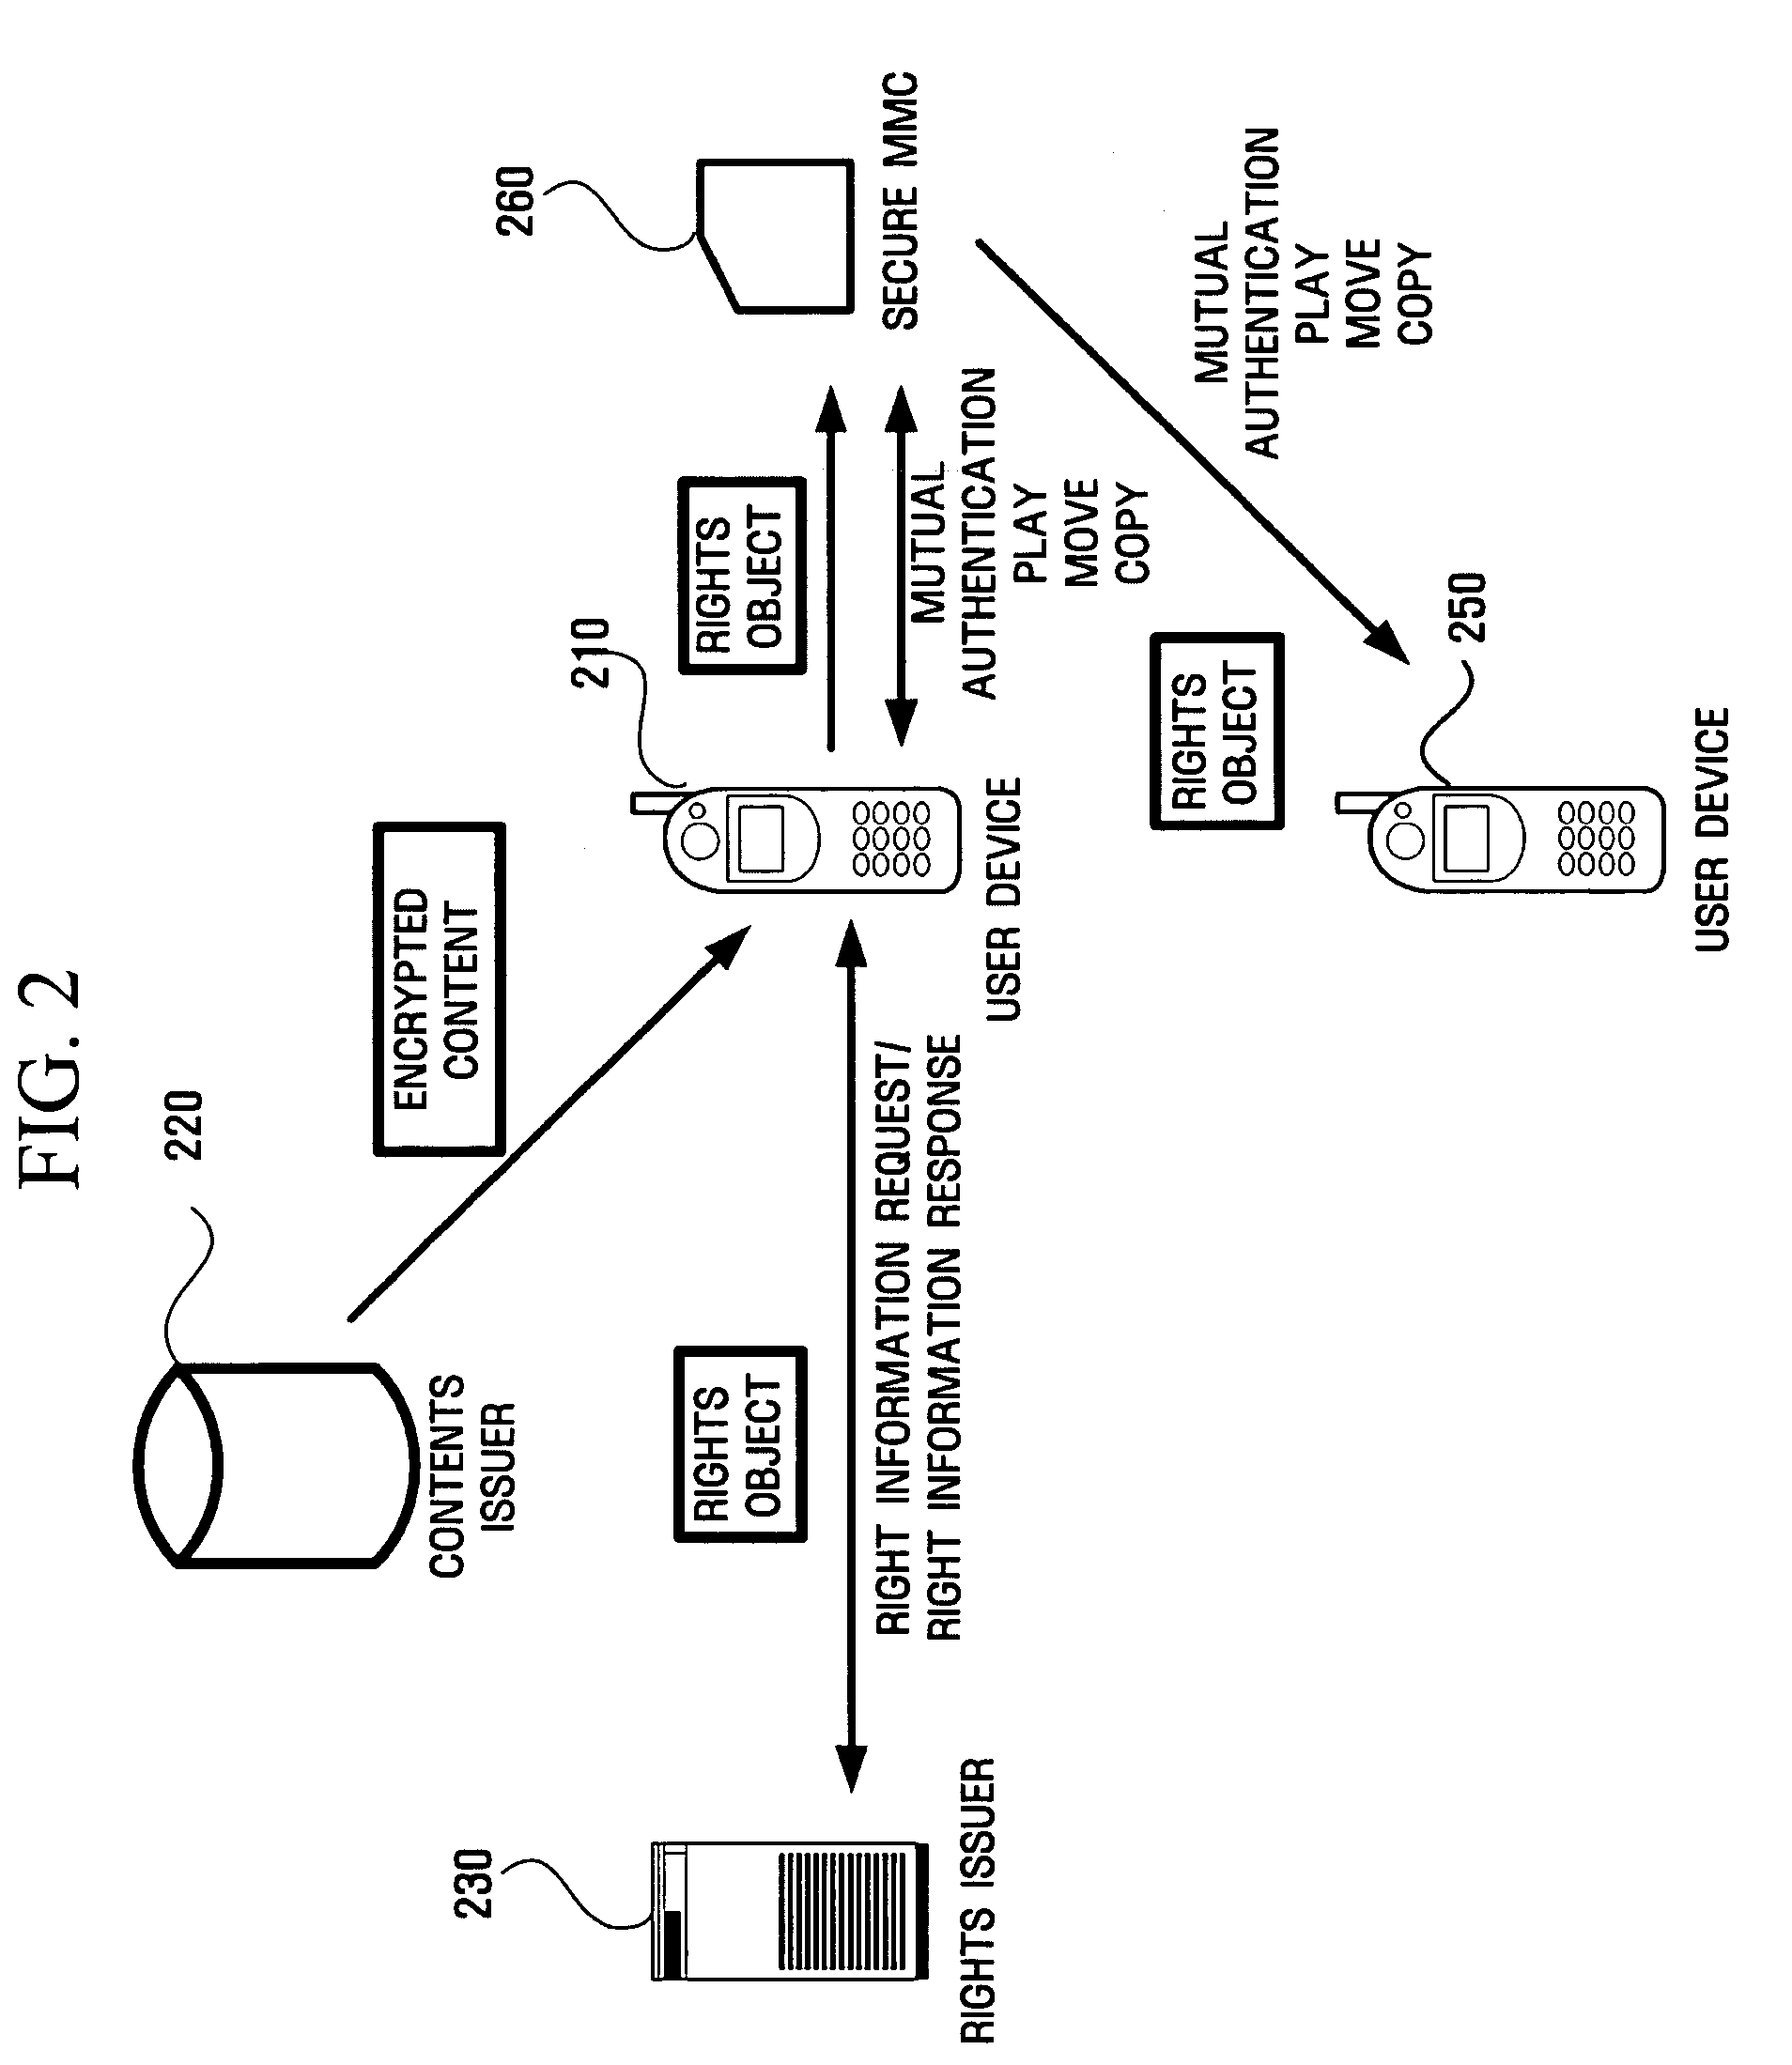 Method and apparatus for acquiring and removing information regarding digital rights objects